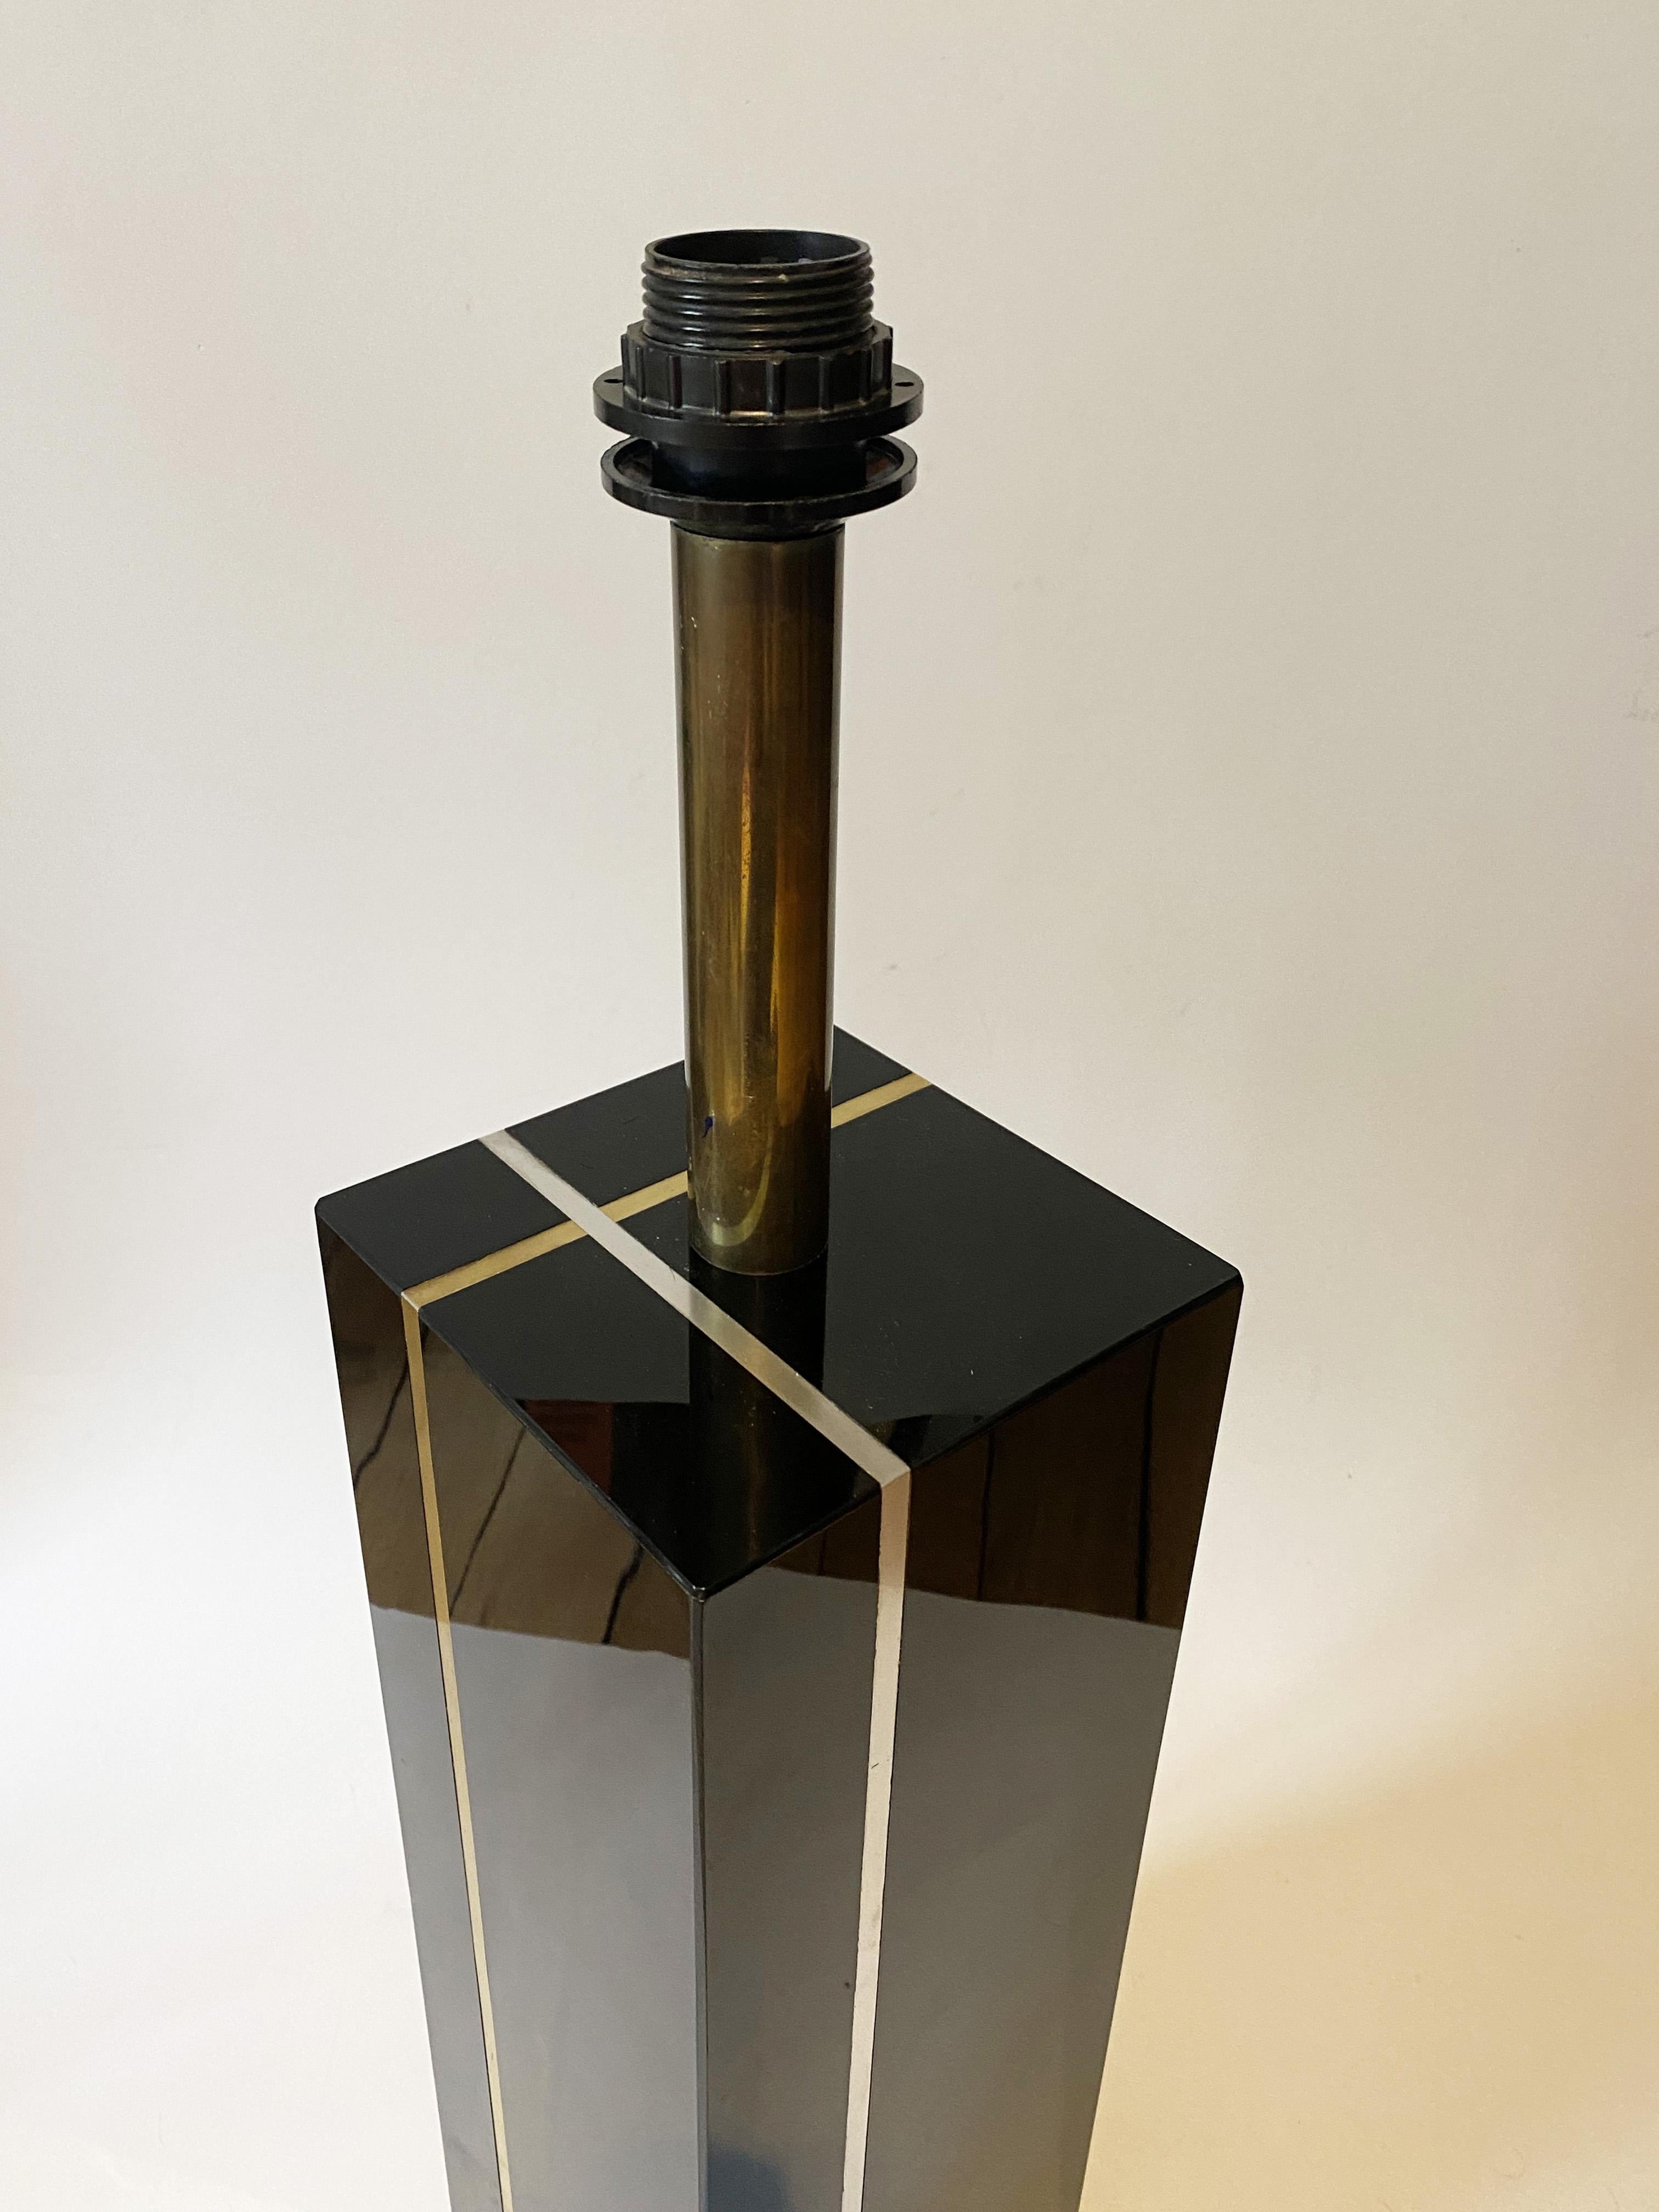 Mid-century Regency Table Lamp in Black Altuglas, Brass and Chrome, in the style of Willy Rizzo, 1970s.
Good condition

Total height: 80 cm
Base height: 46 cm